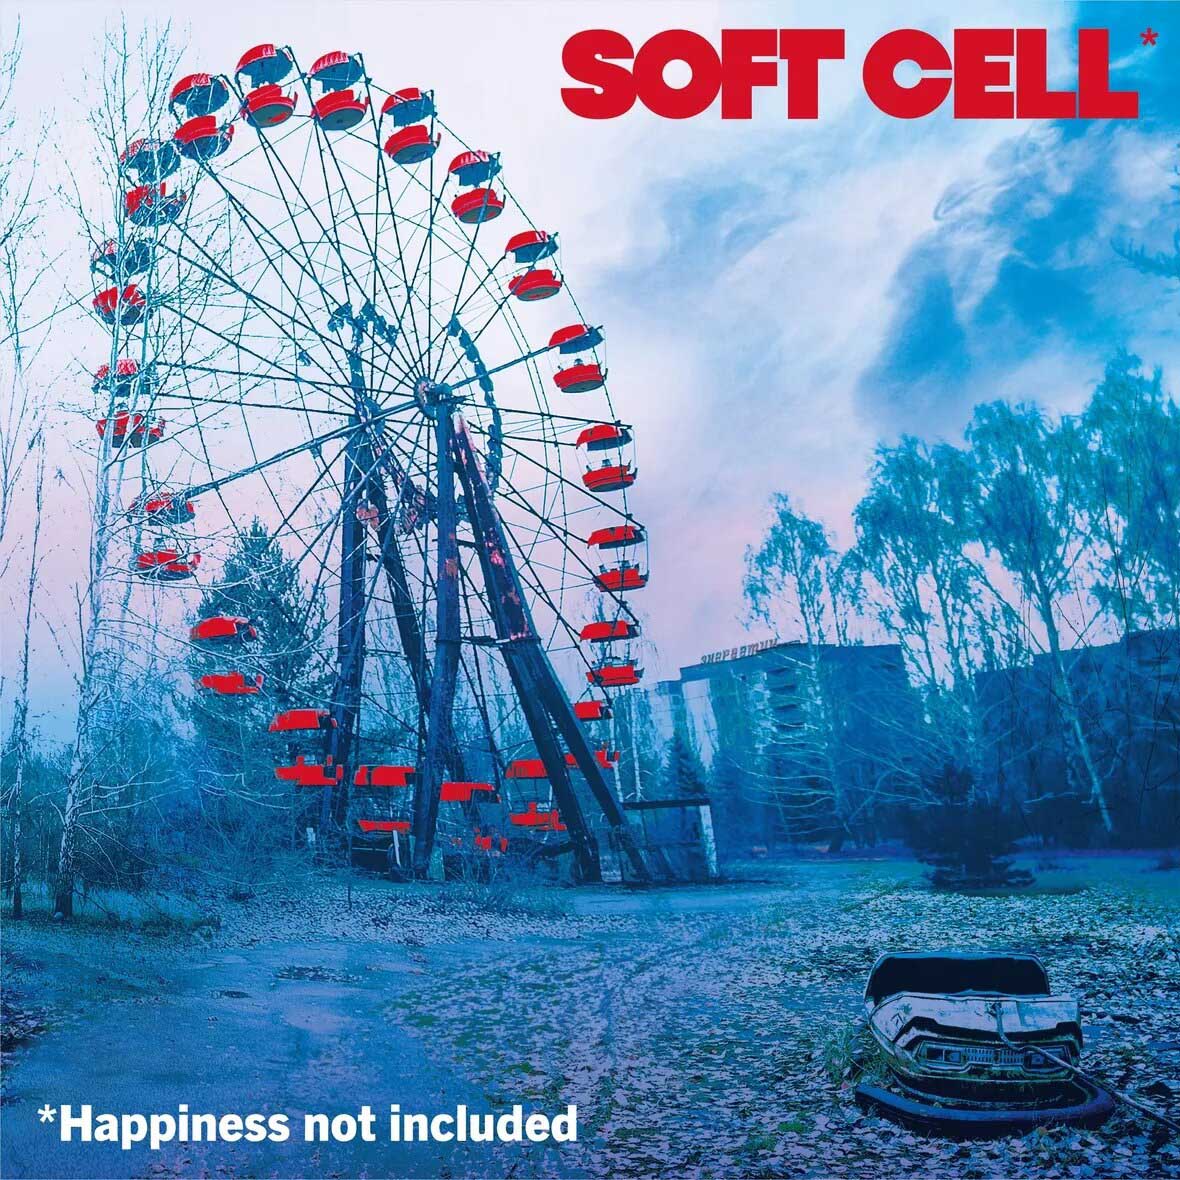 SoftCell_HappinessNotIncluded_2021